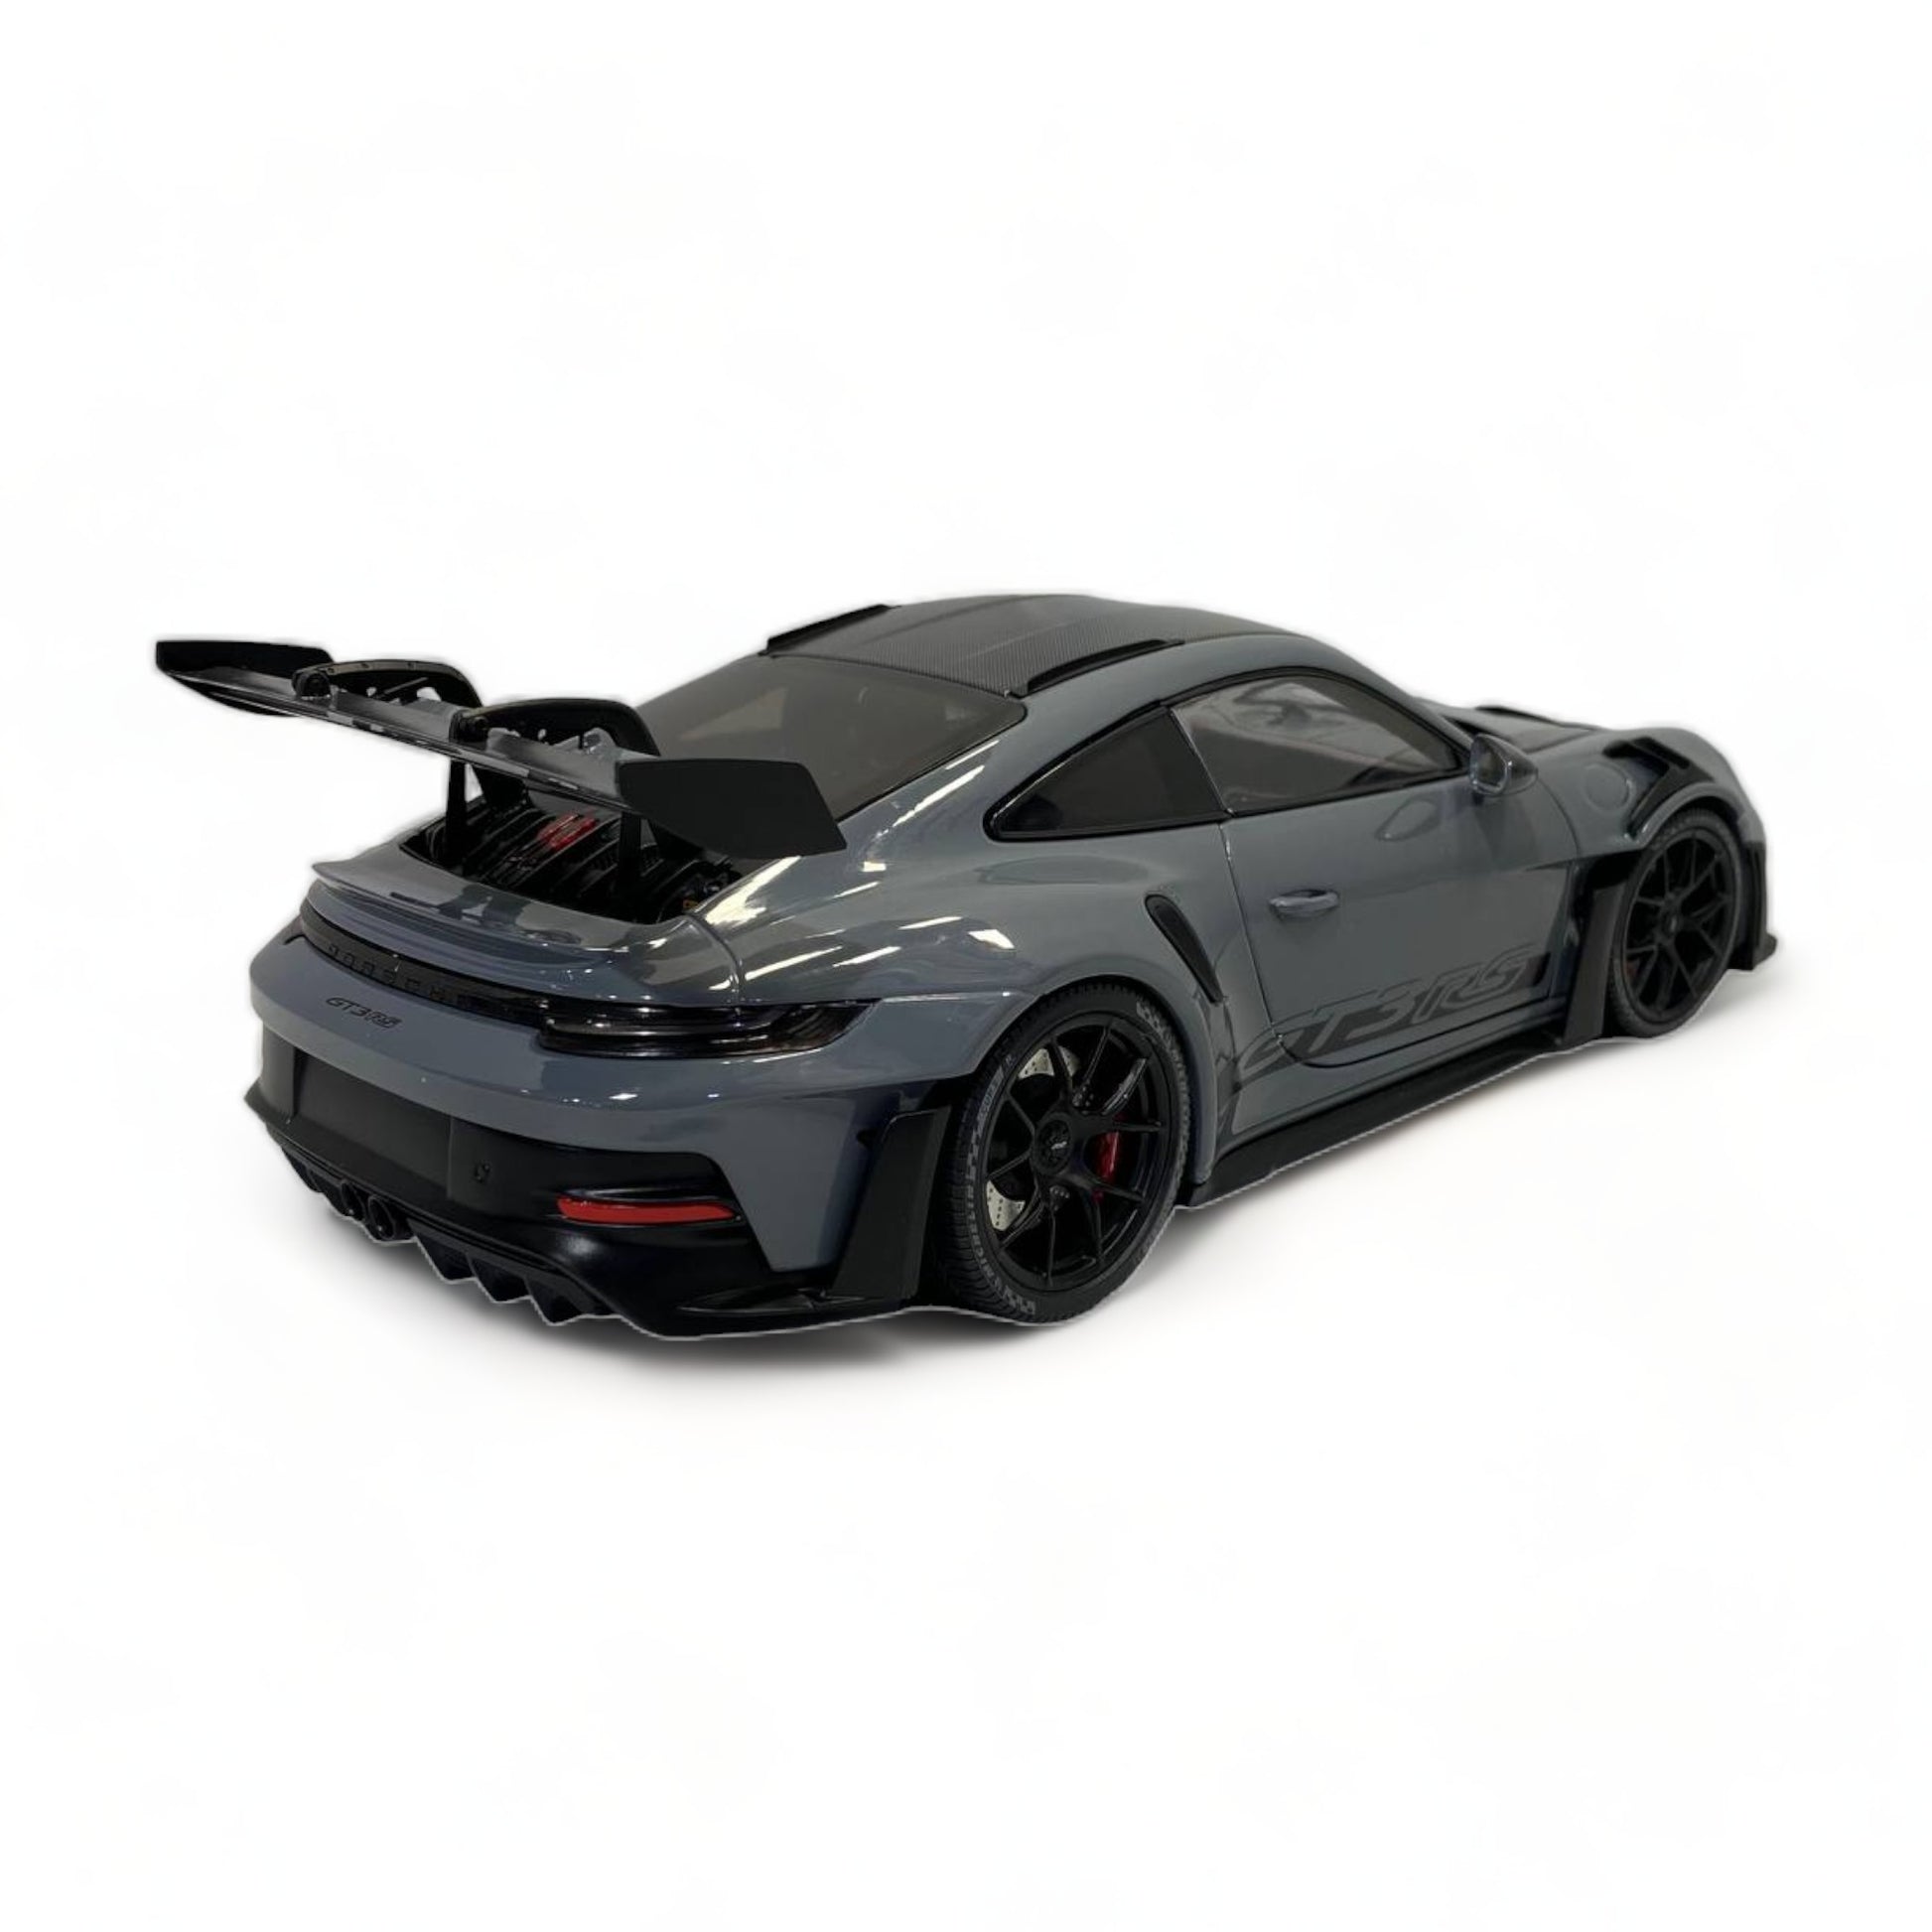 1/18 Minichamps Metal Diecast - Porsche 911 GT3 RS in Striking Grey/Carbon with Full Opening|Sold in Dturman.com Dubai UAE.